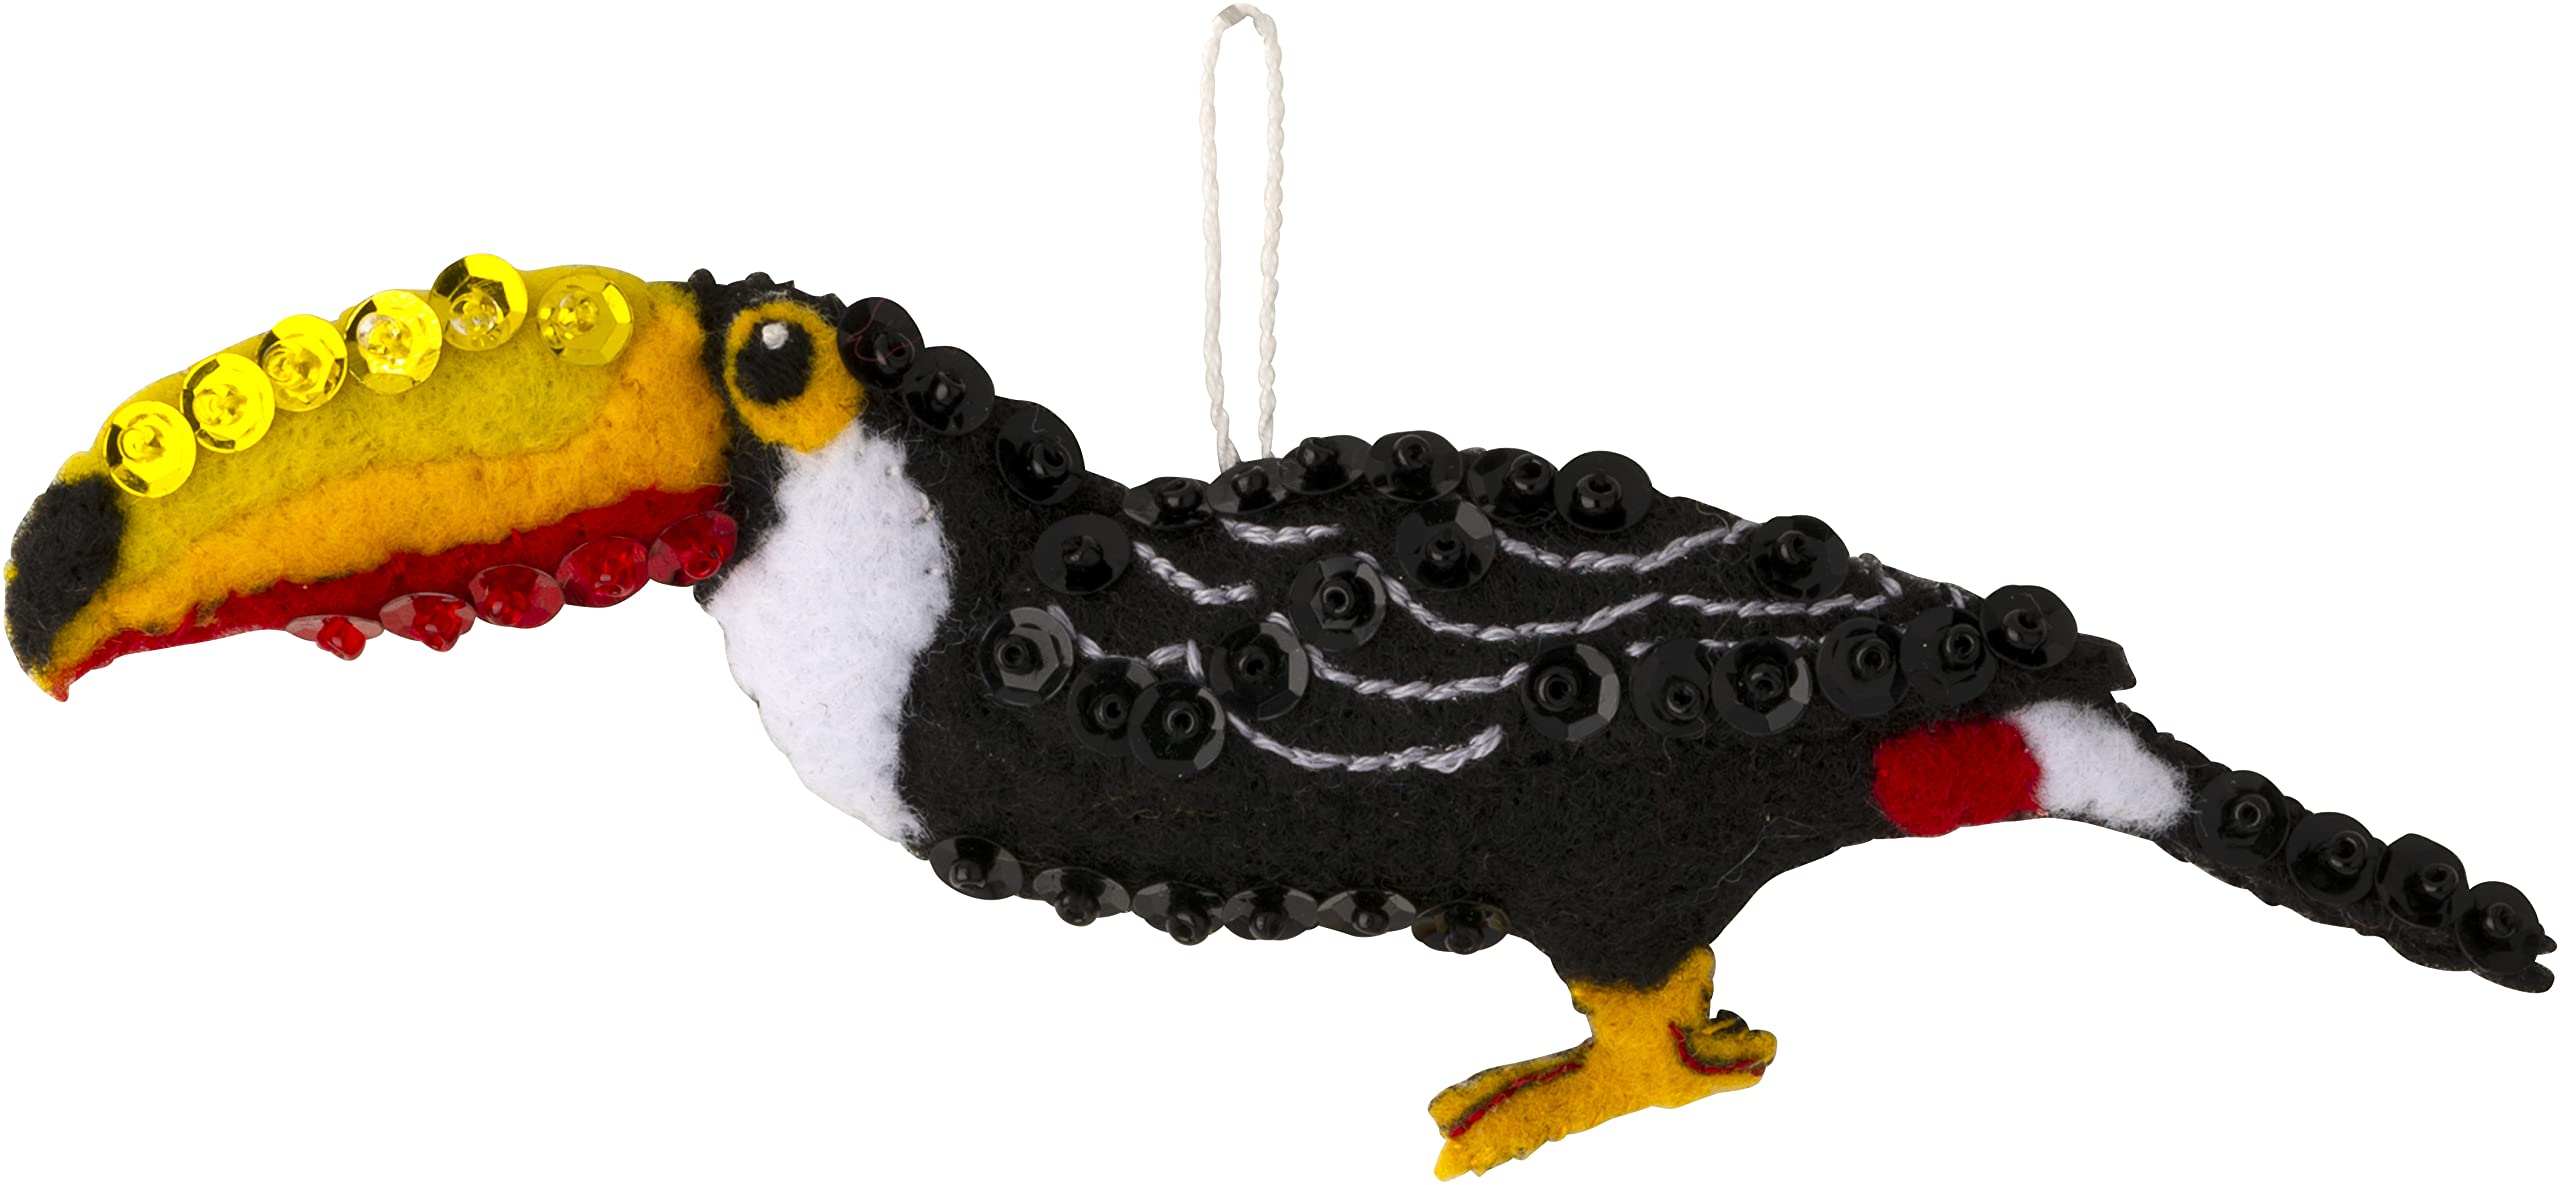 Bucilla, Tropical Birds Set of 6 Felt Applique Ornament Making Kit, Perfect for DIY Needlepoint Arts and Crafts, 89491E